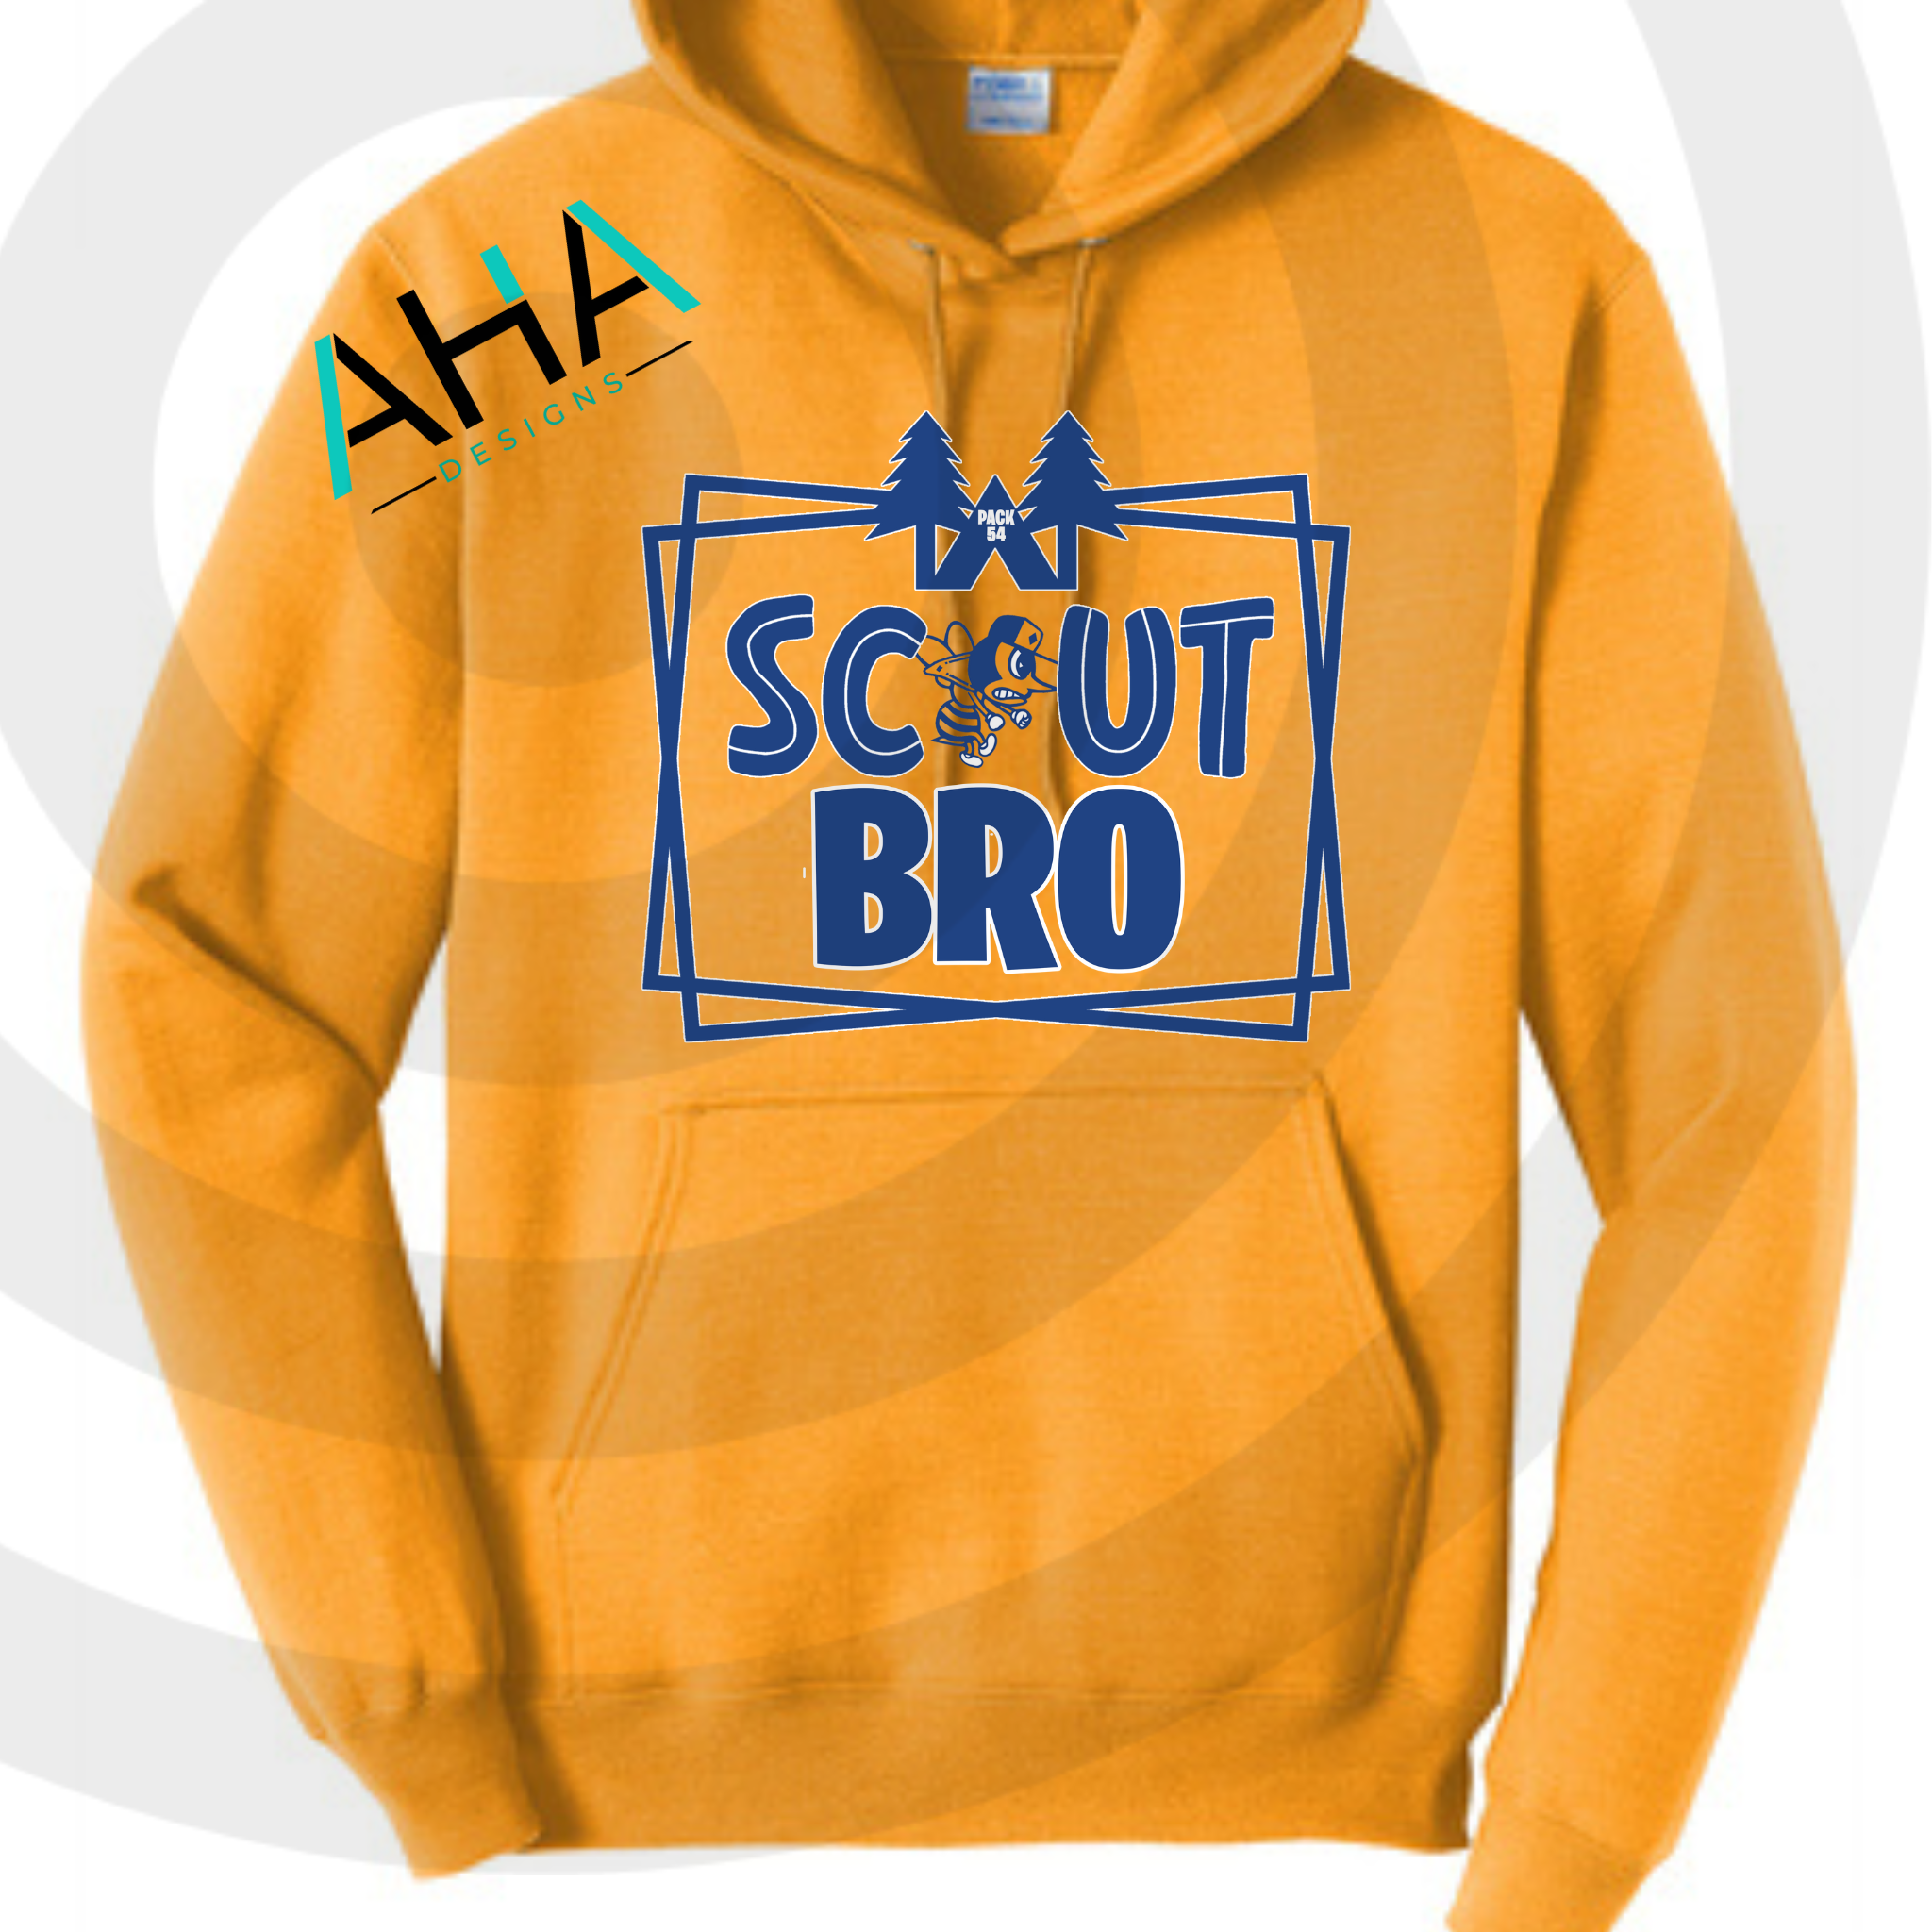 Cub Scouts "Scout Bro" Gold Hoodie